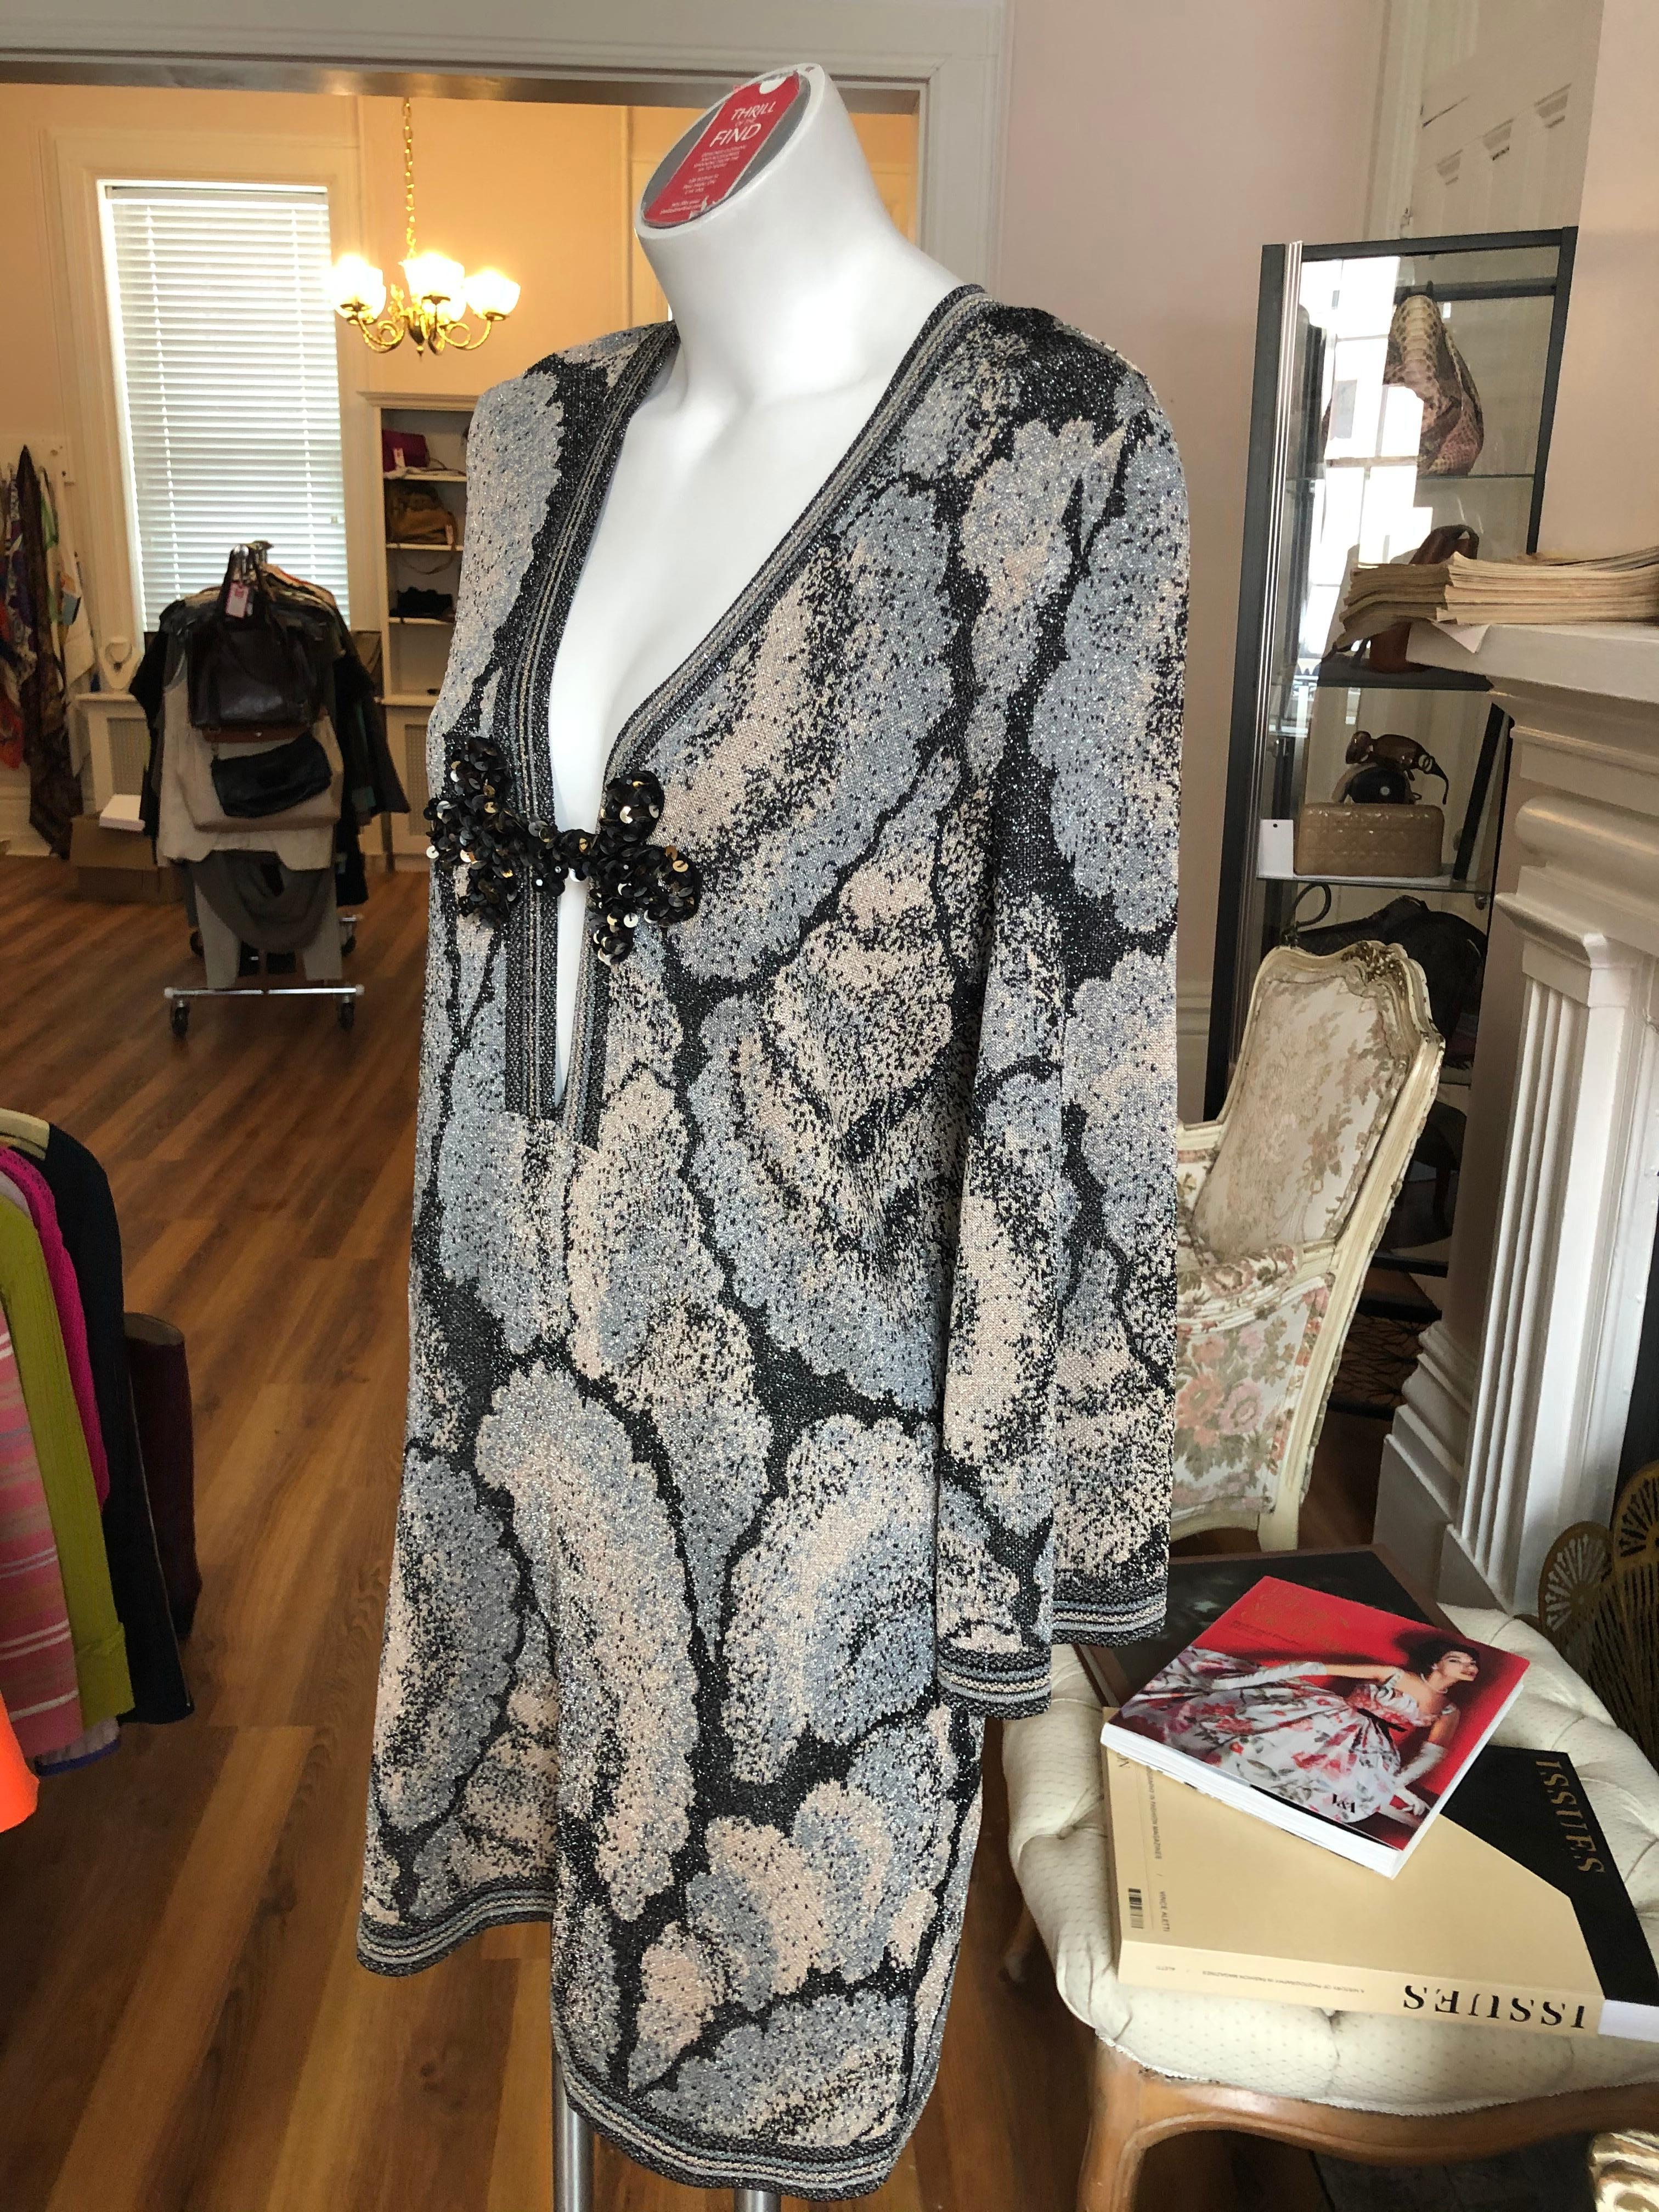 Recognized as a Missoni by its trim, this is a viscose blend mini/tunic which sparkles and is decorated with sequins bridging the decollete neckline.

WEar as a mini dress with tights or as a tunic with leggings.